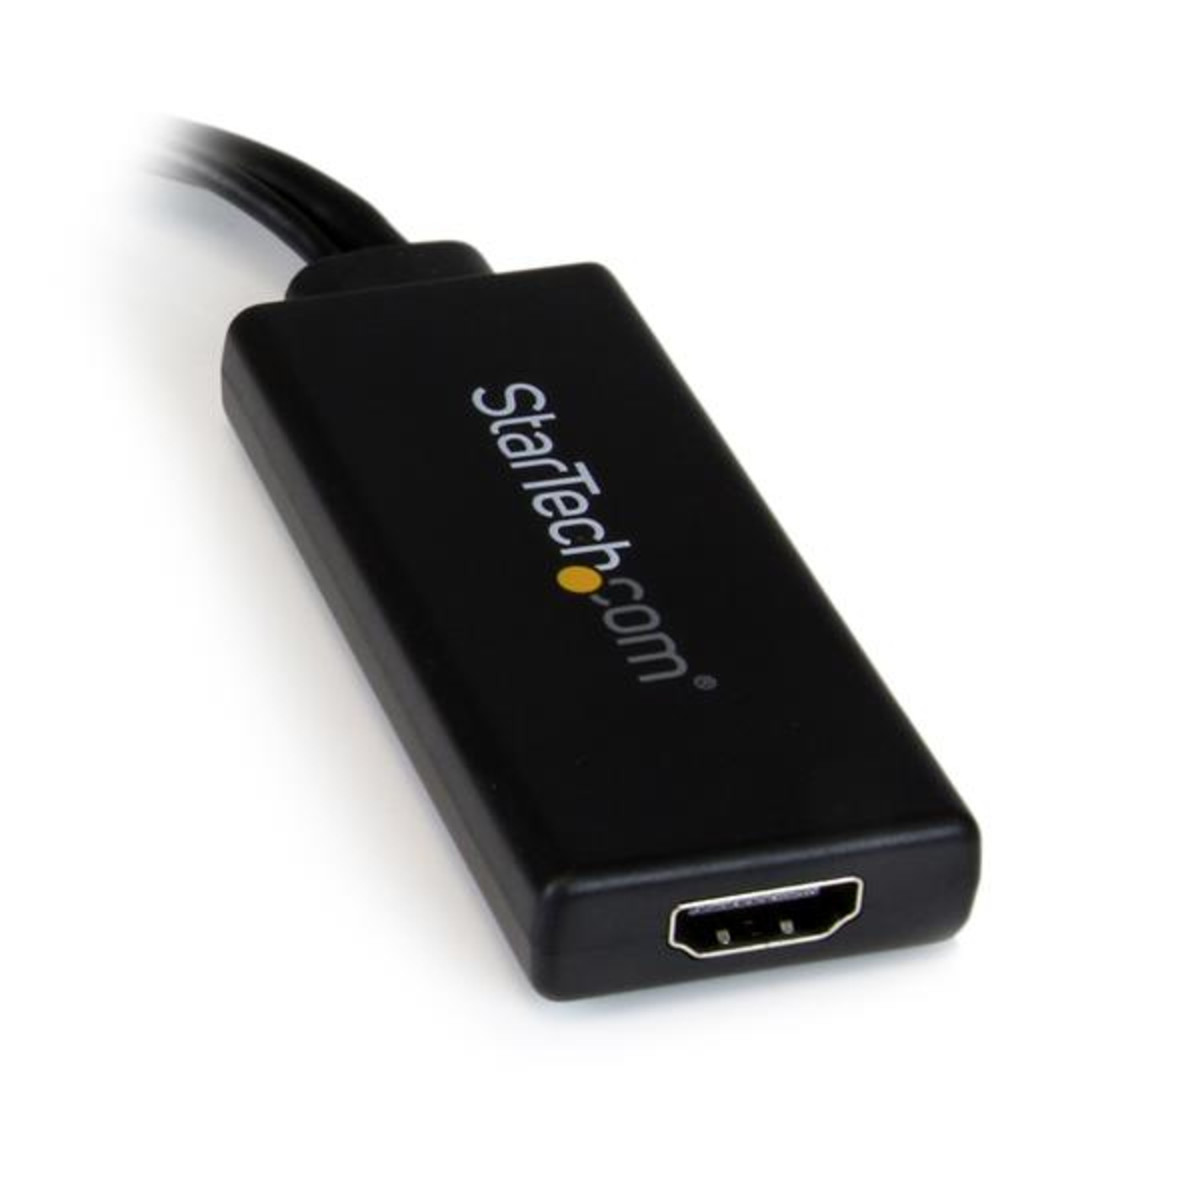 VGA-HDMI Adapter with USB Audio & Power